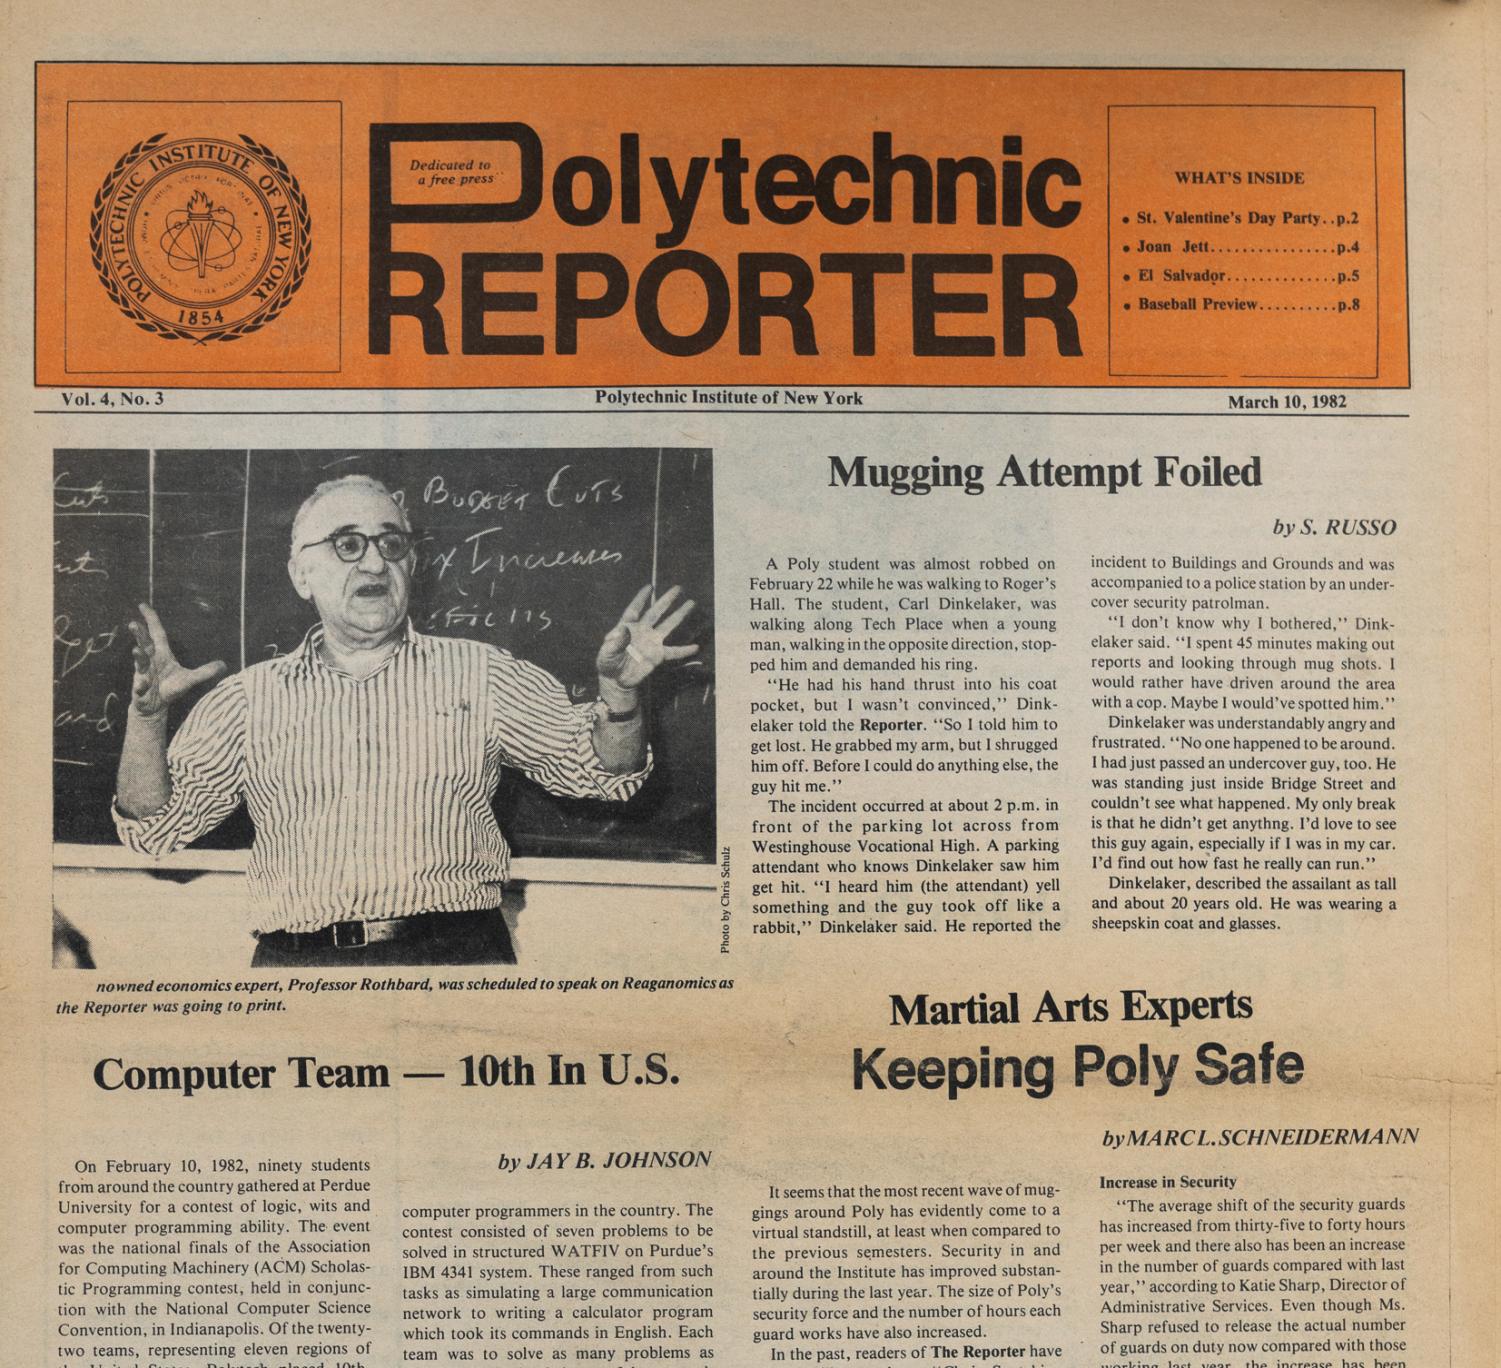 The front page from a 1982 Polytechnic Reporter (Polytechnic’s student newspaper) paper includes mugging attempts on students and the school hiring frat brothers to protect students.